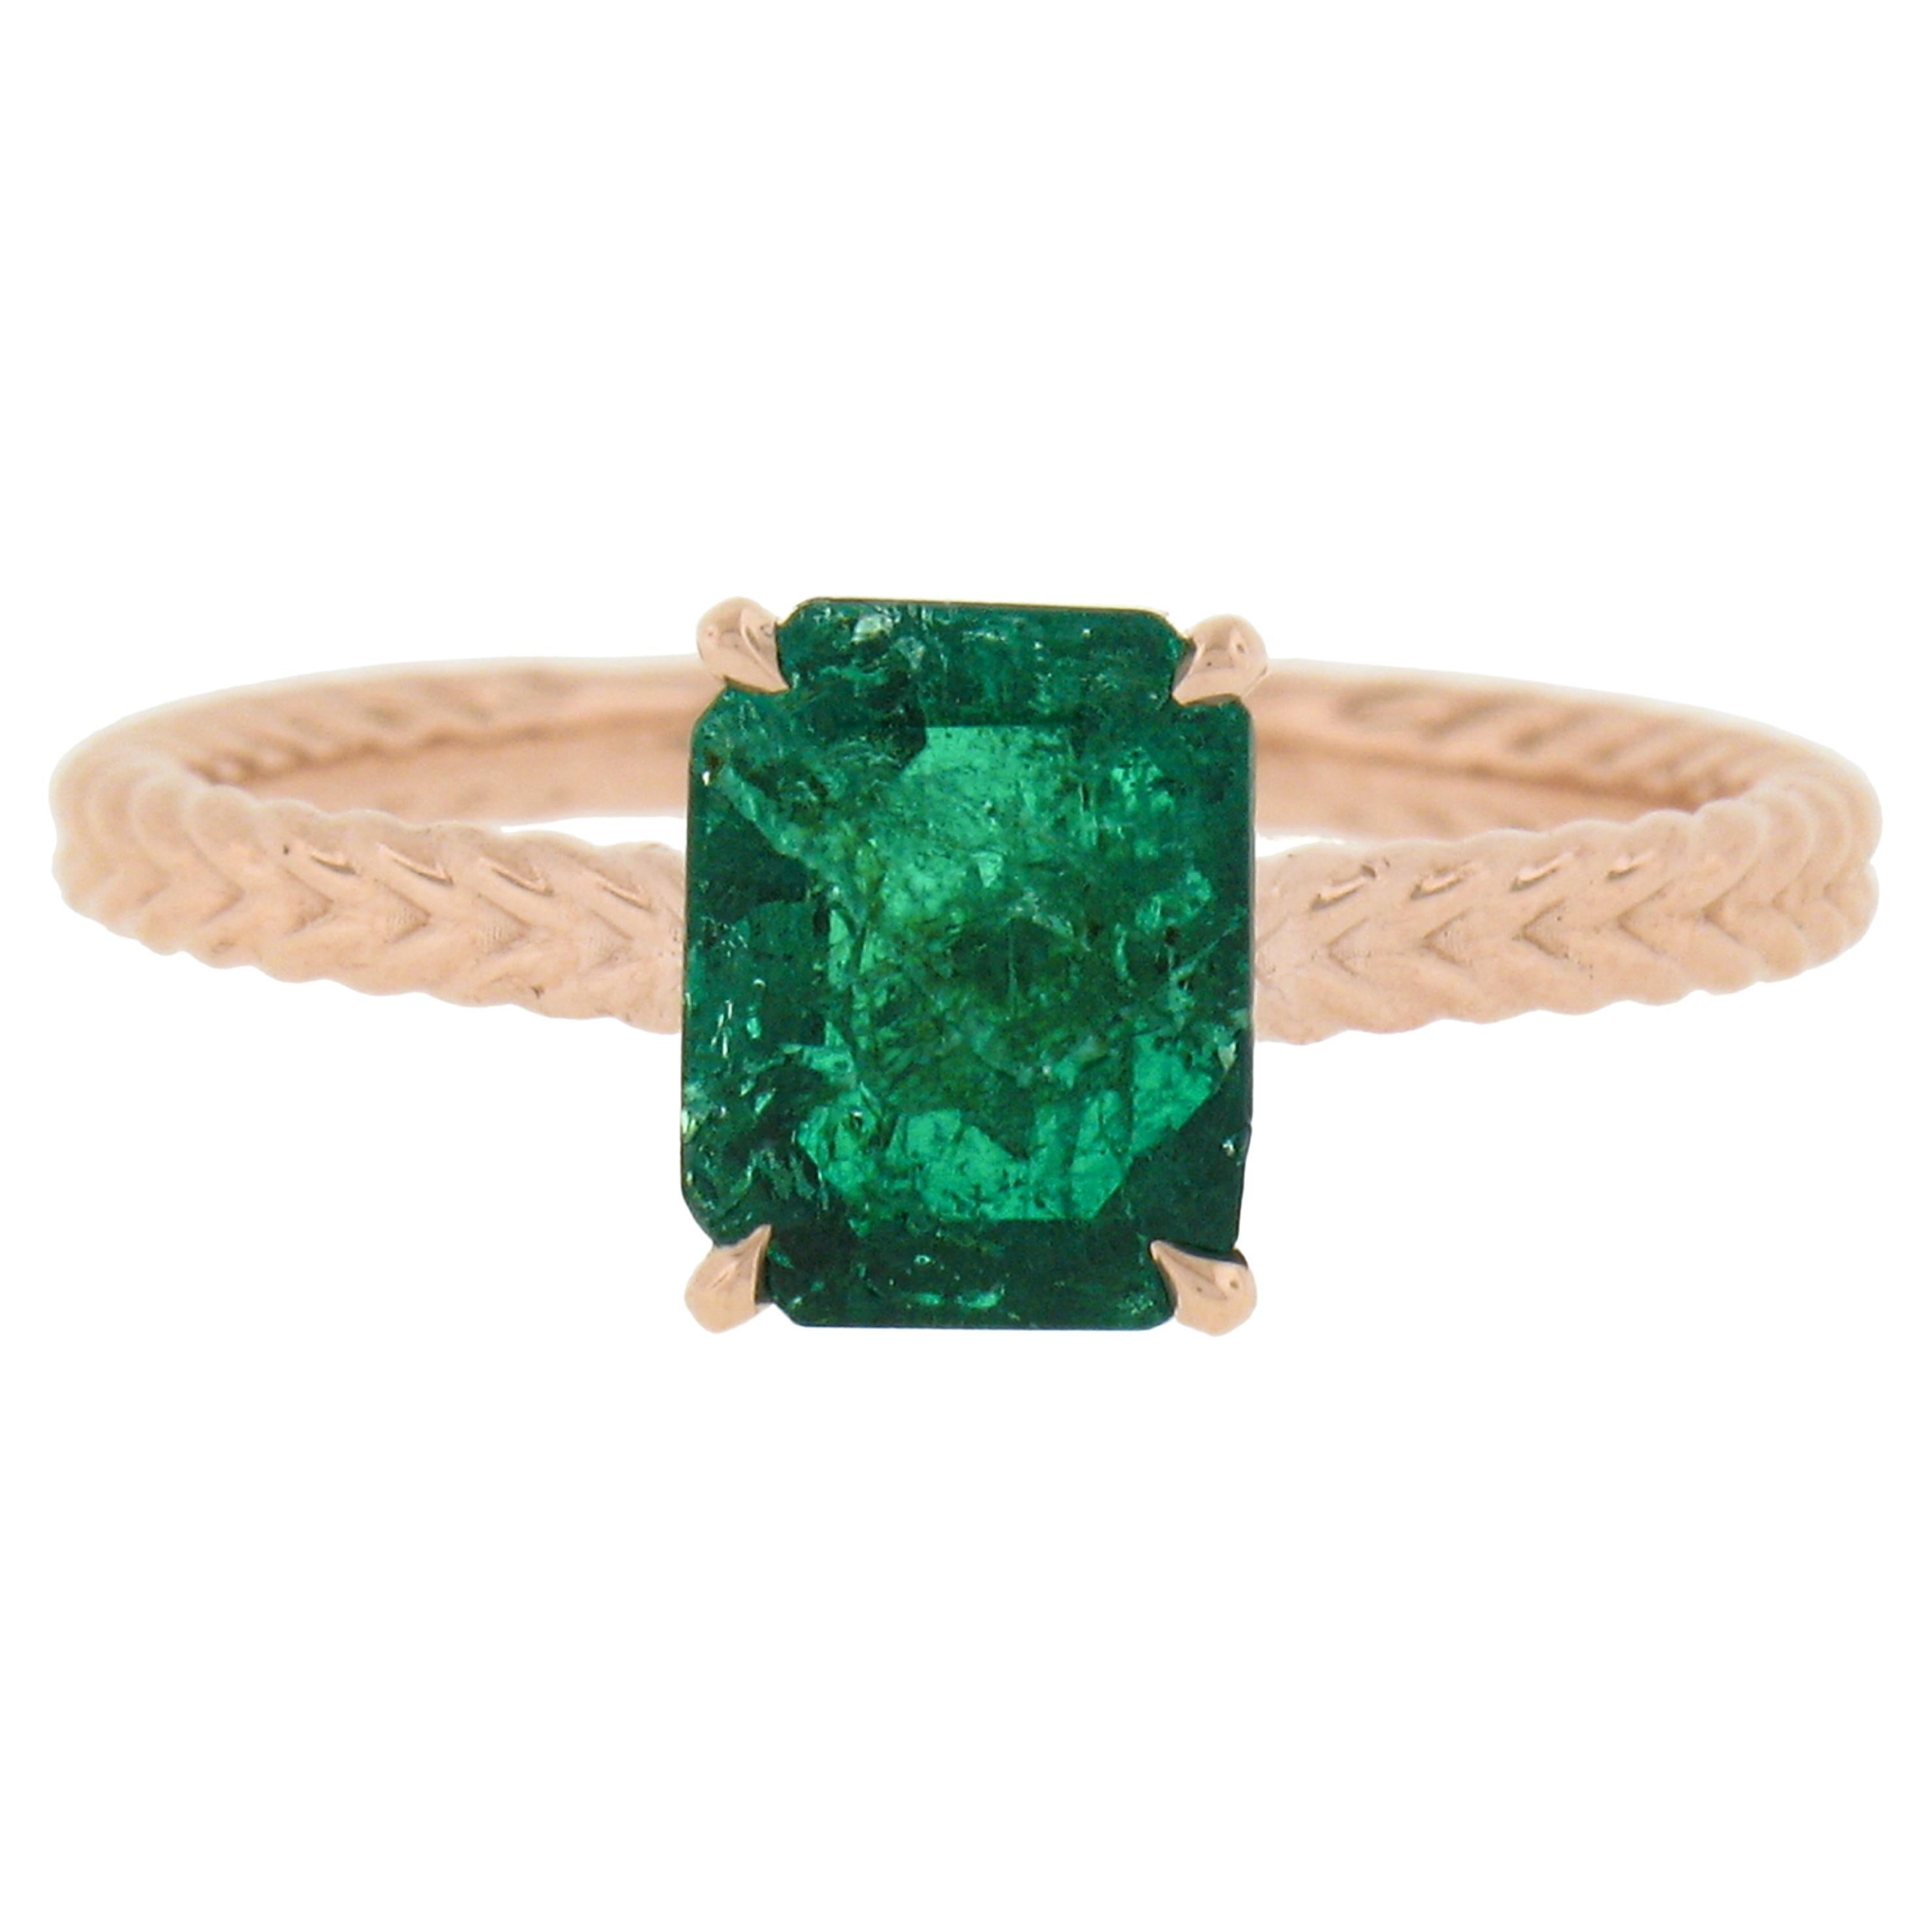 New 14k Gold 1.43ctw GIA Octagonal Prong Green Emerald Solitaire Engagement Ring